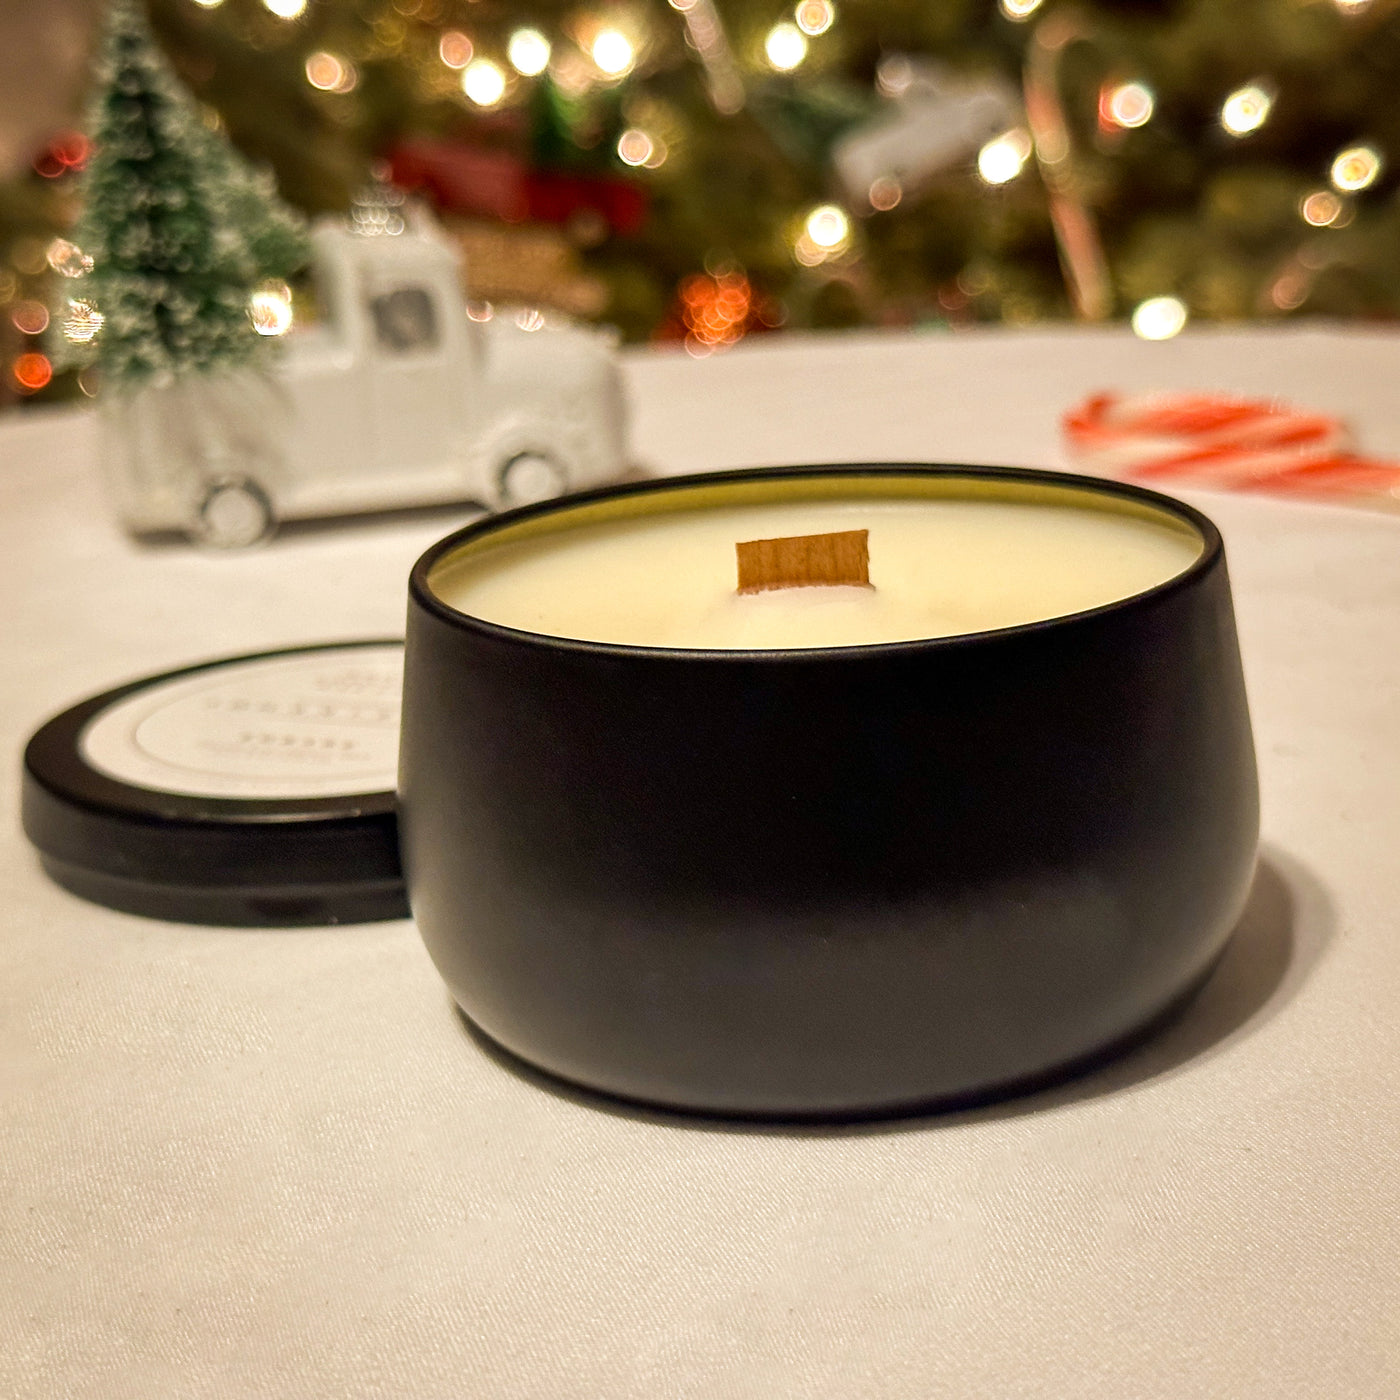 Black metal candle tin with white wax and wood wick, on a white table with a blurred Christmas scene in background